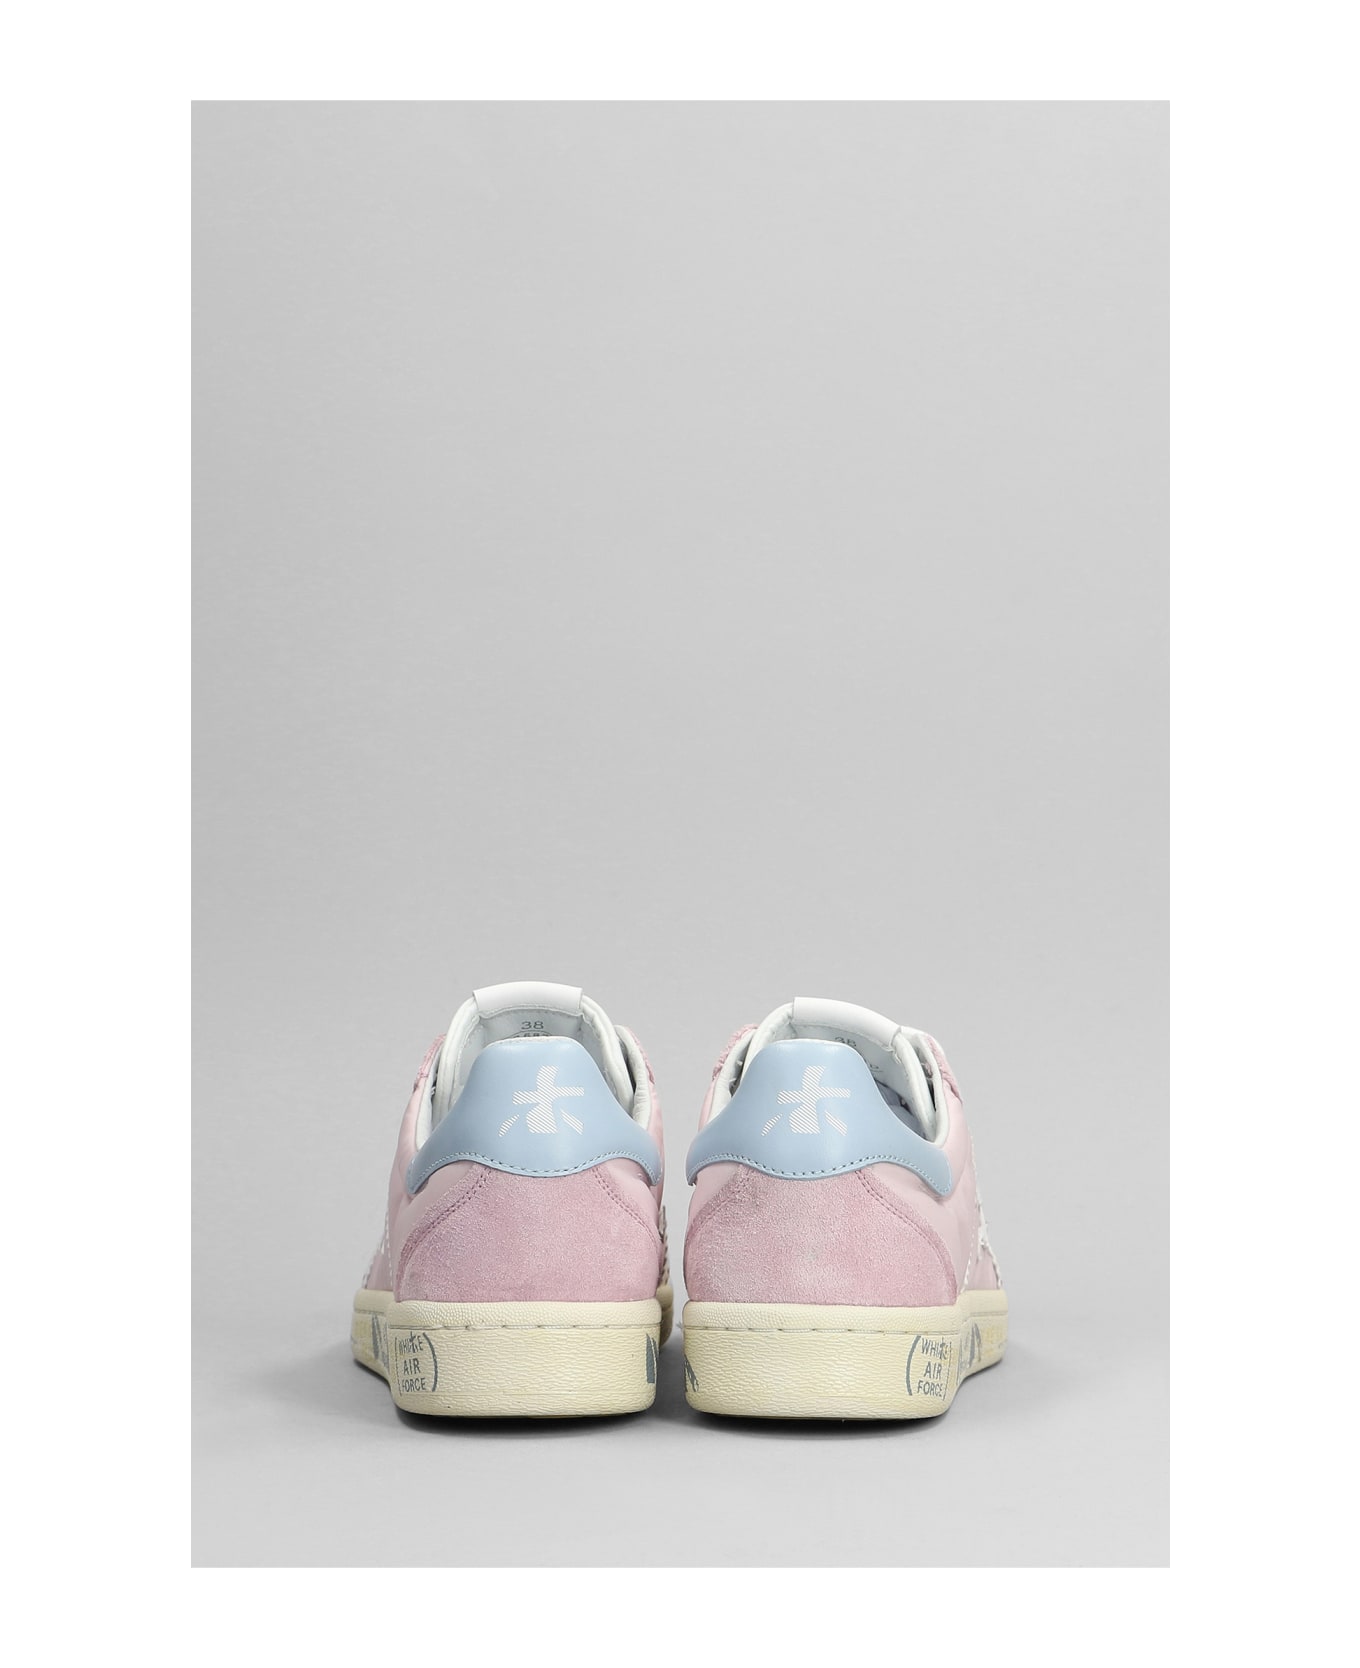 Premiata Bonnie Sneakers In Rose-pink Suede And Fabric - rose-pink